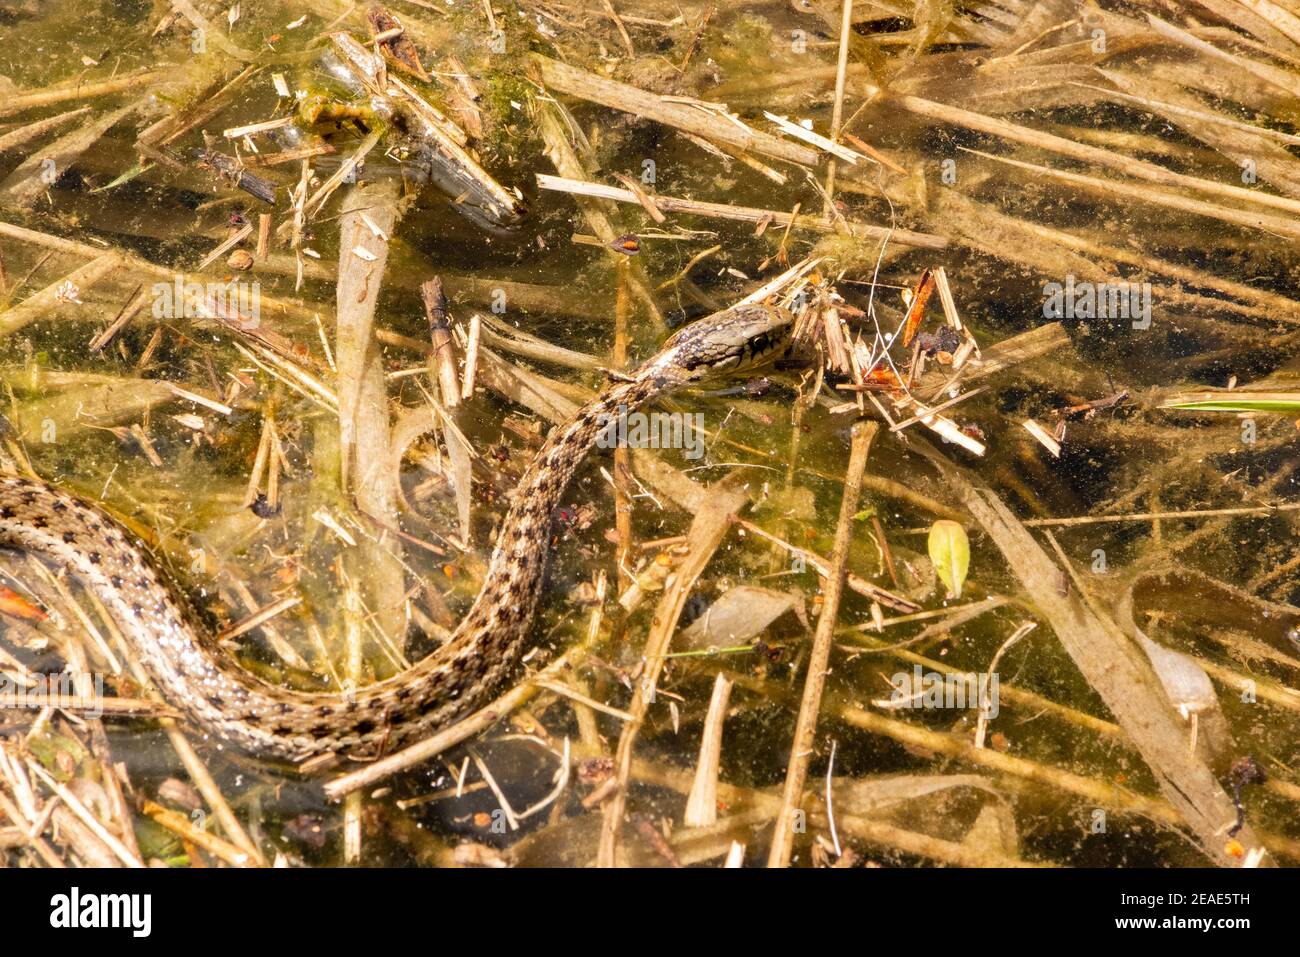 An aquatic common garter snake (Thamnophis sirtalis) swimming across a marshy area, in a beaver pond, on Rock Creek, in Missoula County, Montana.   Ki Stock Photo